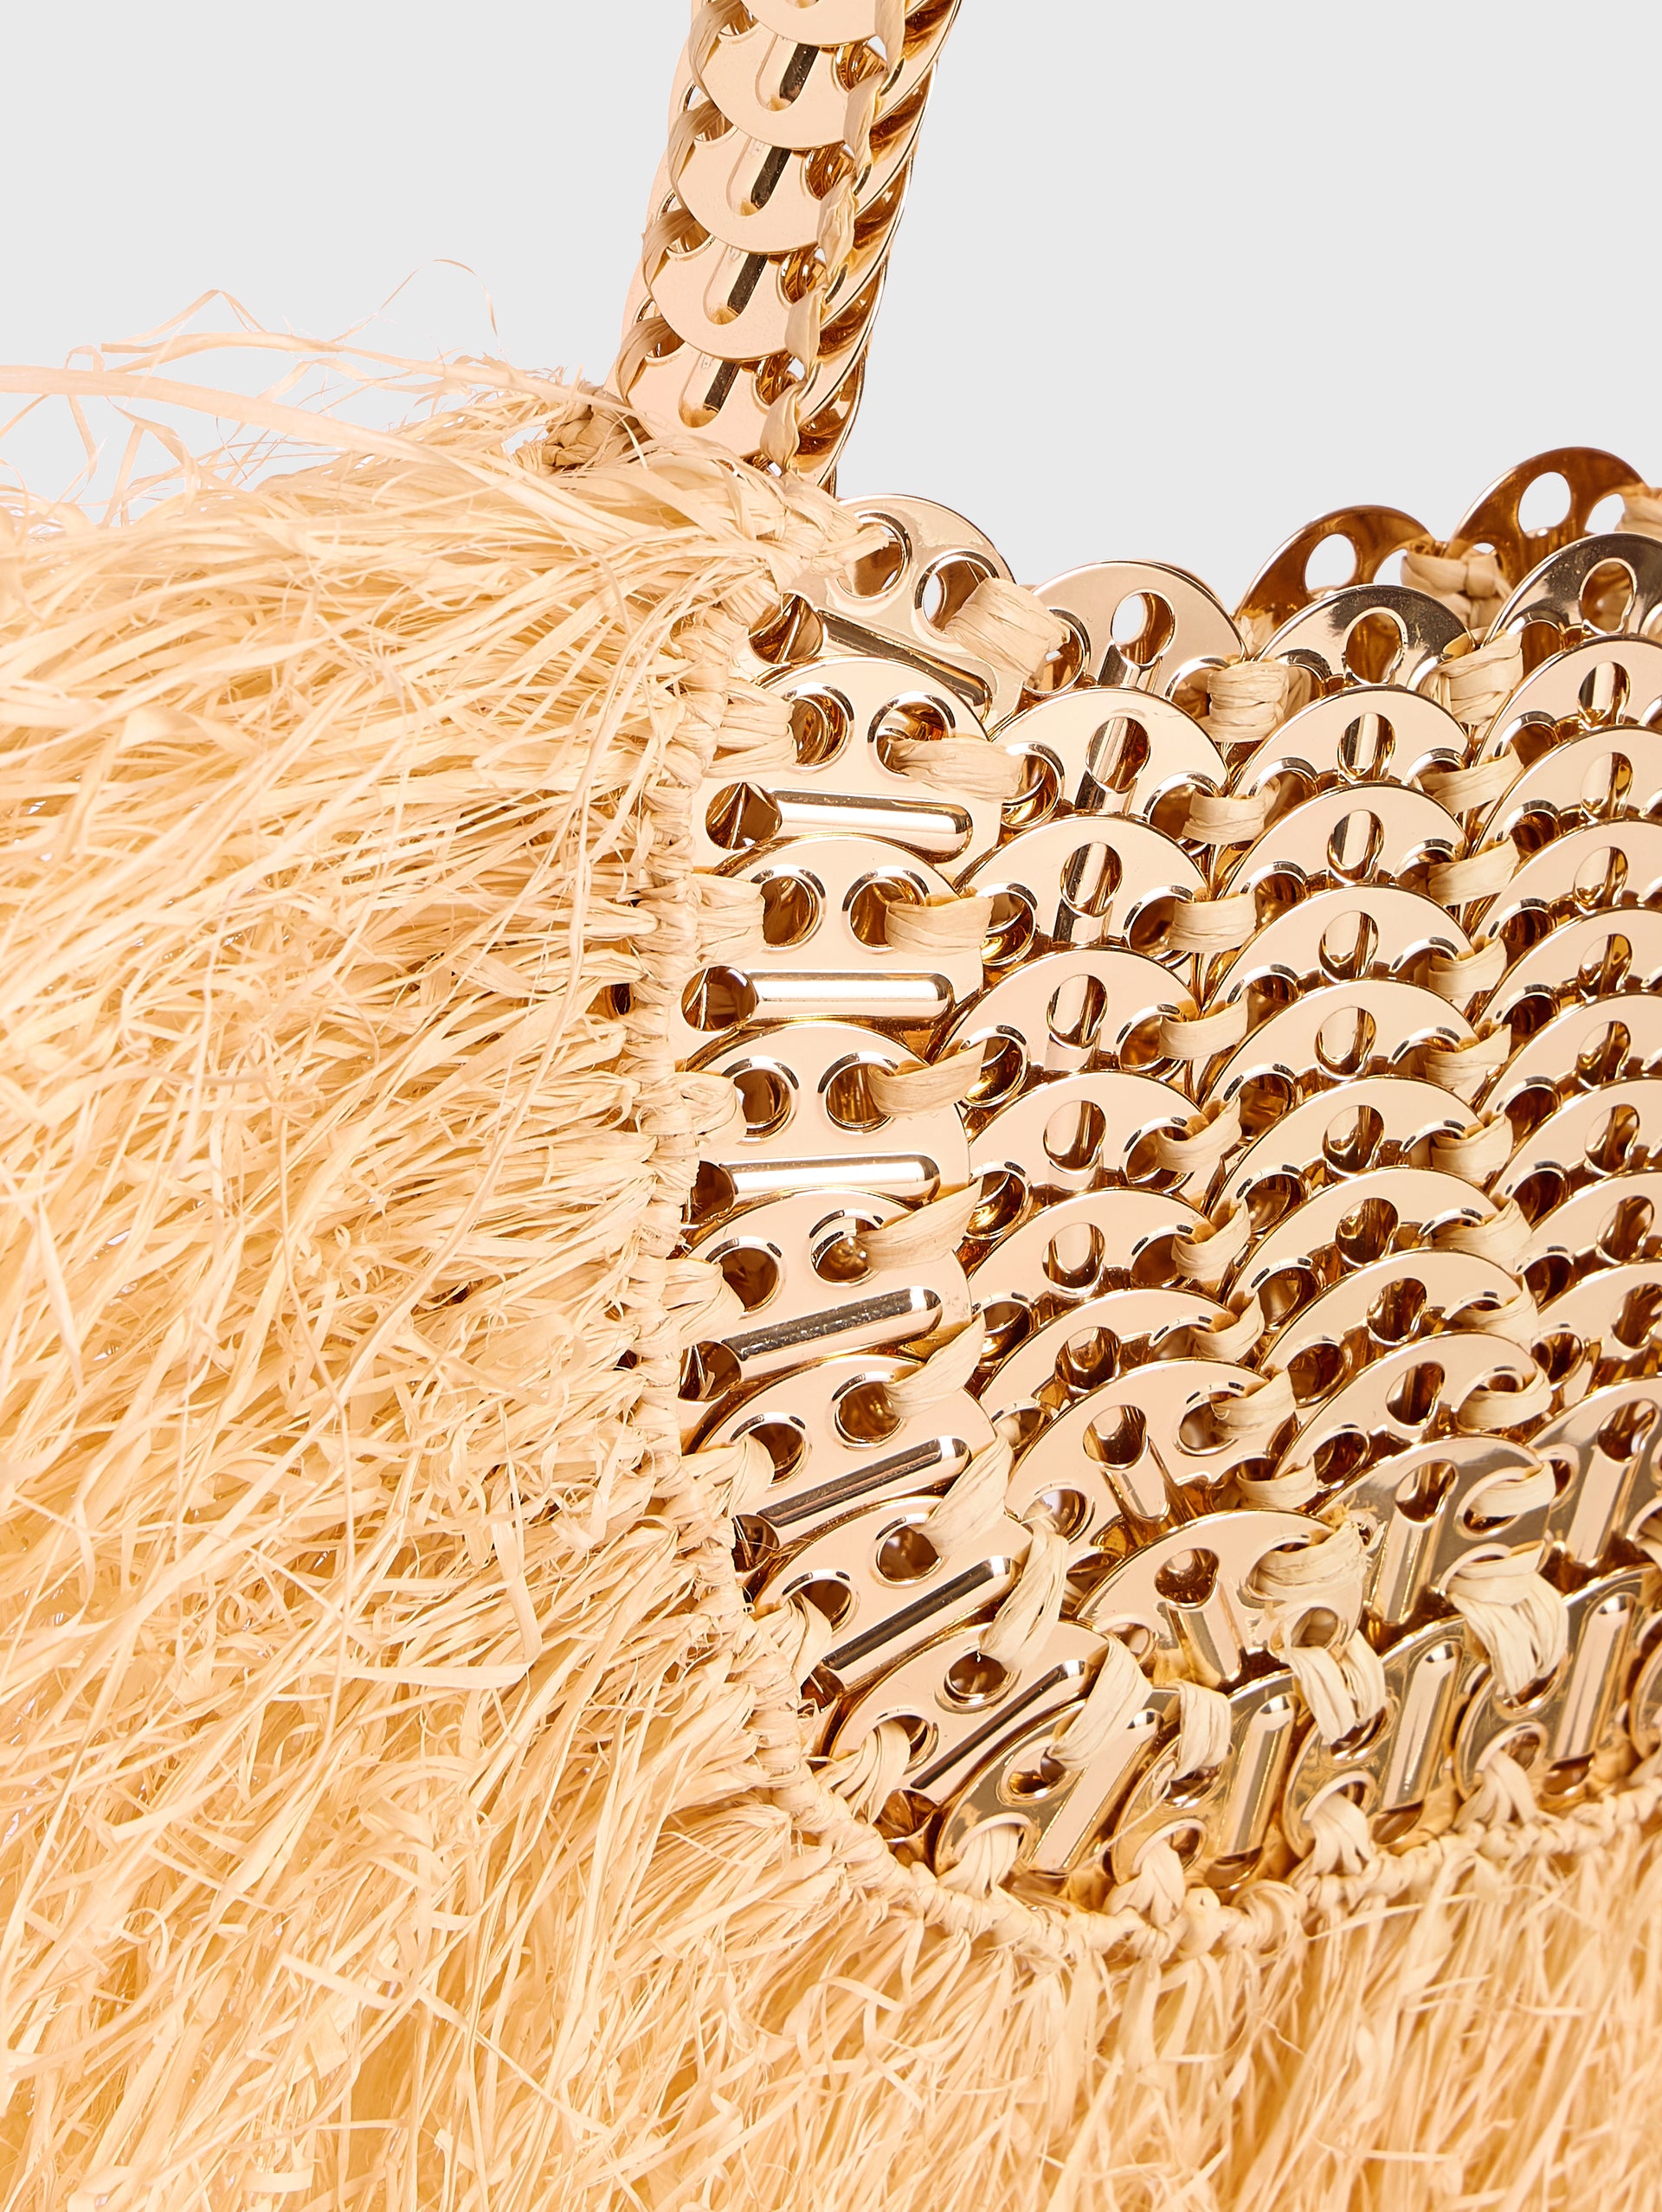 Iconic 1969 moon bag with natural raphia fringes